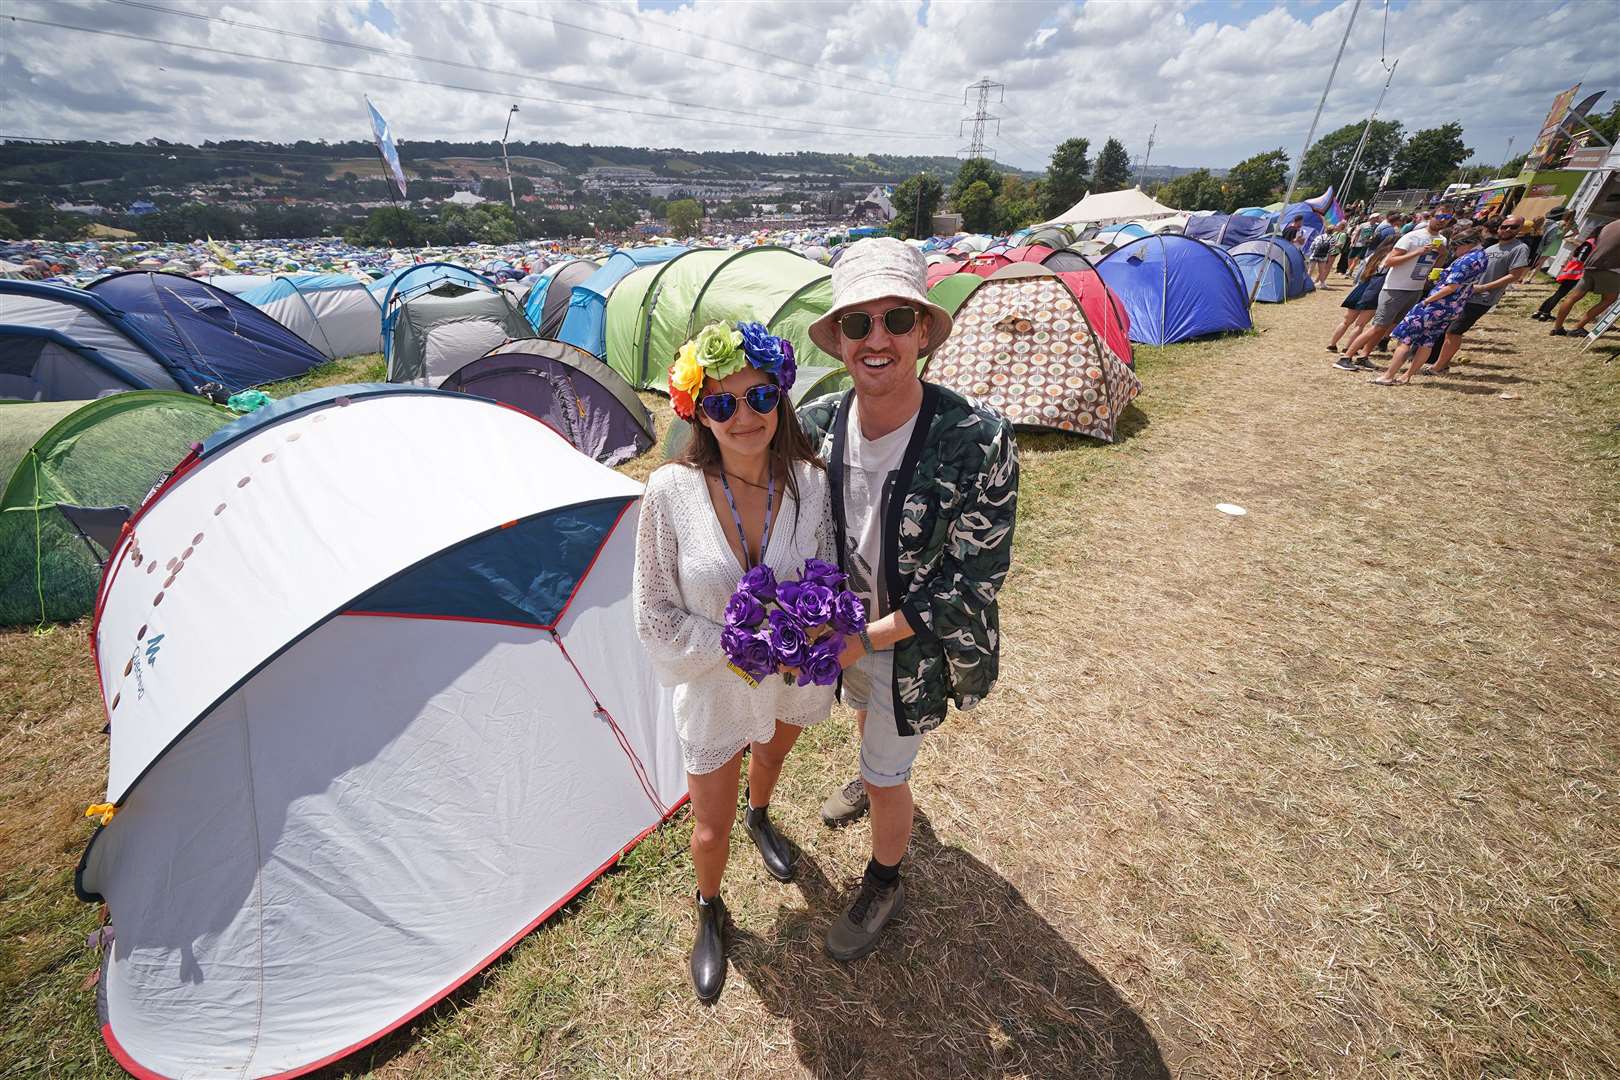 The festivalgoers in front of their temporary home (Yui Mok/PA)